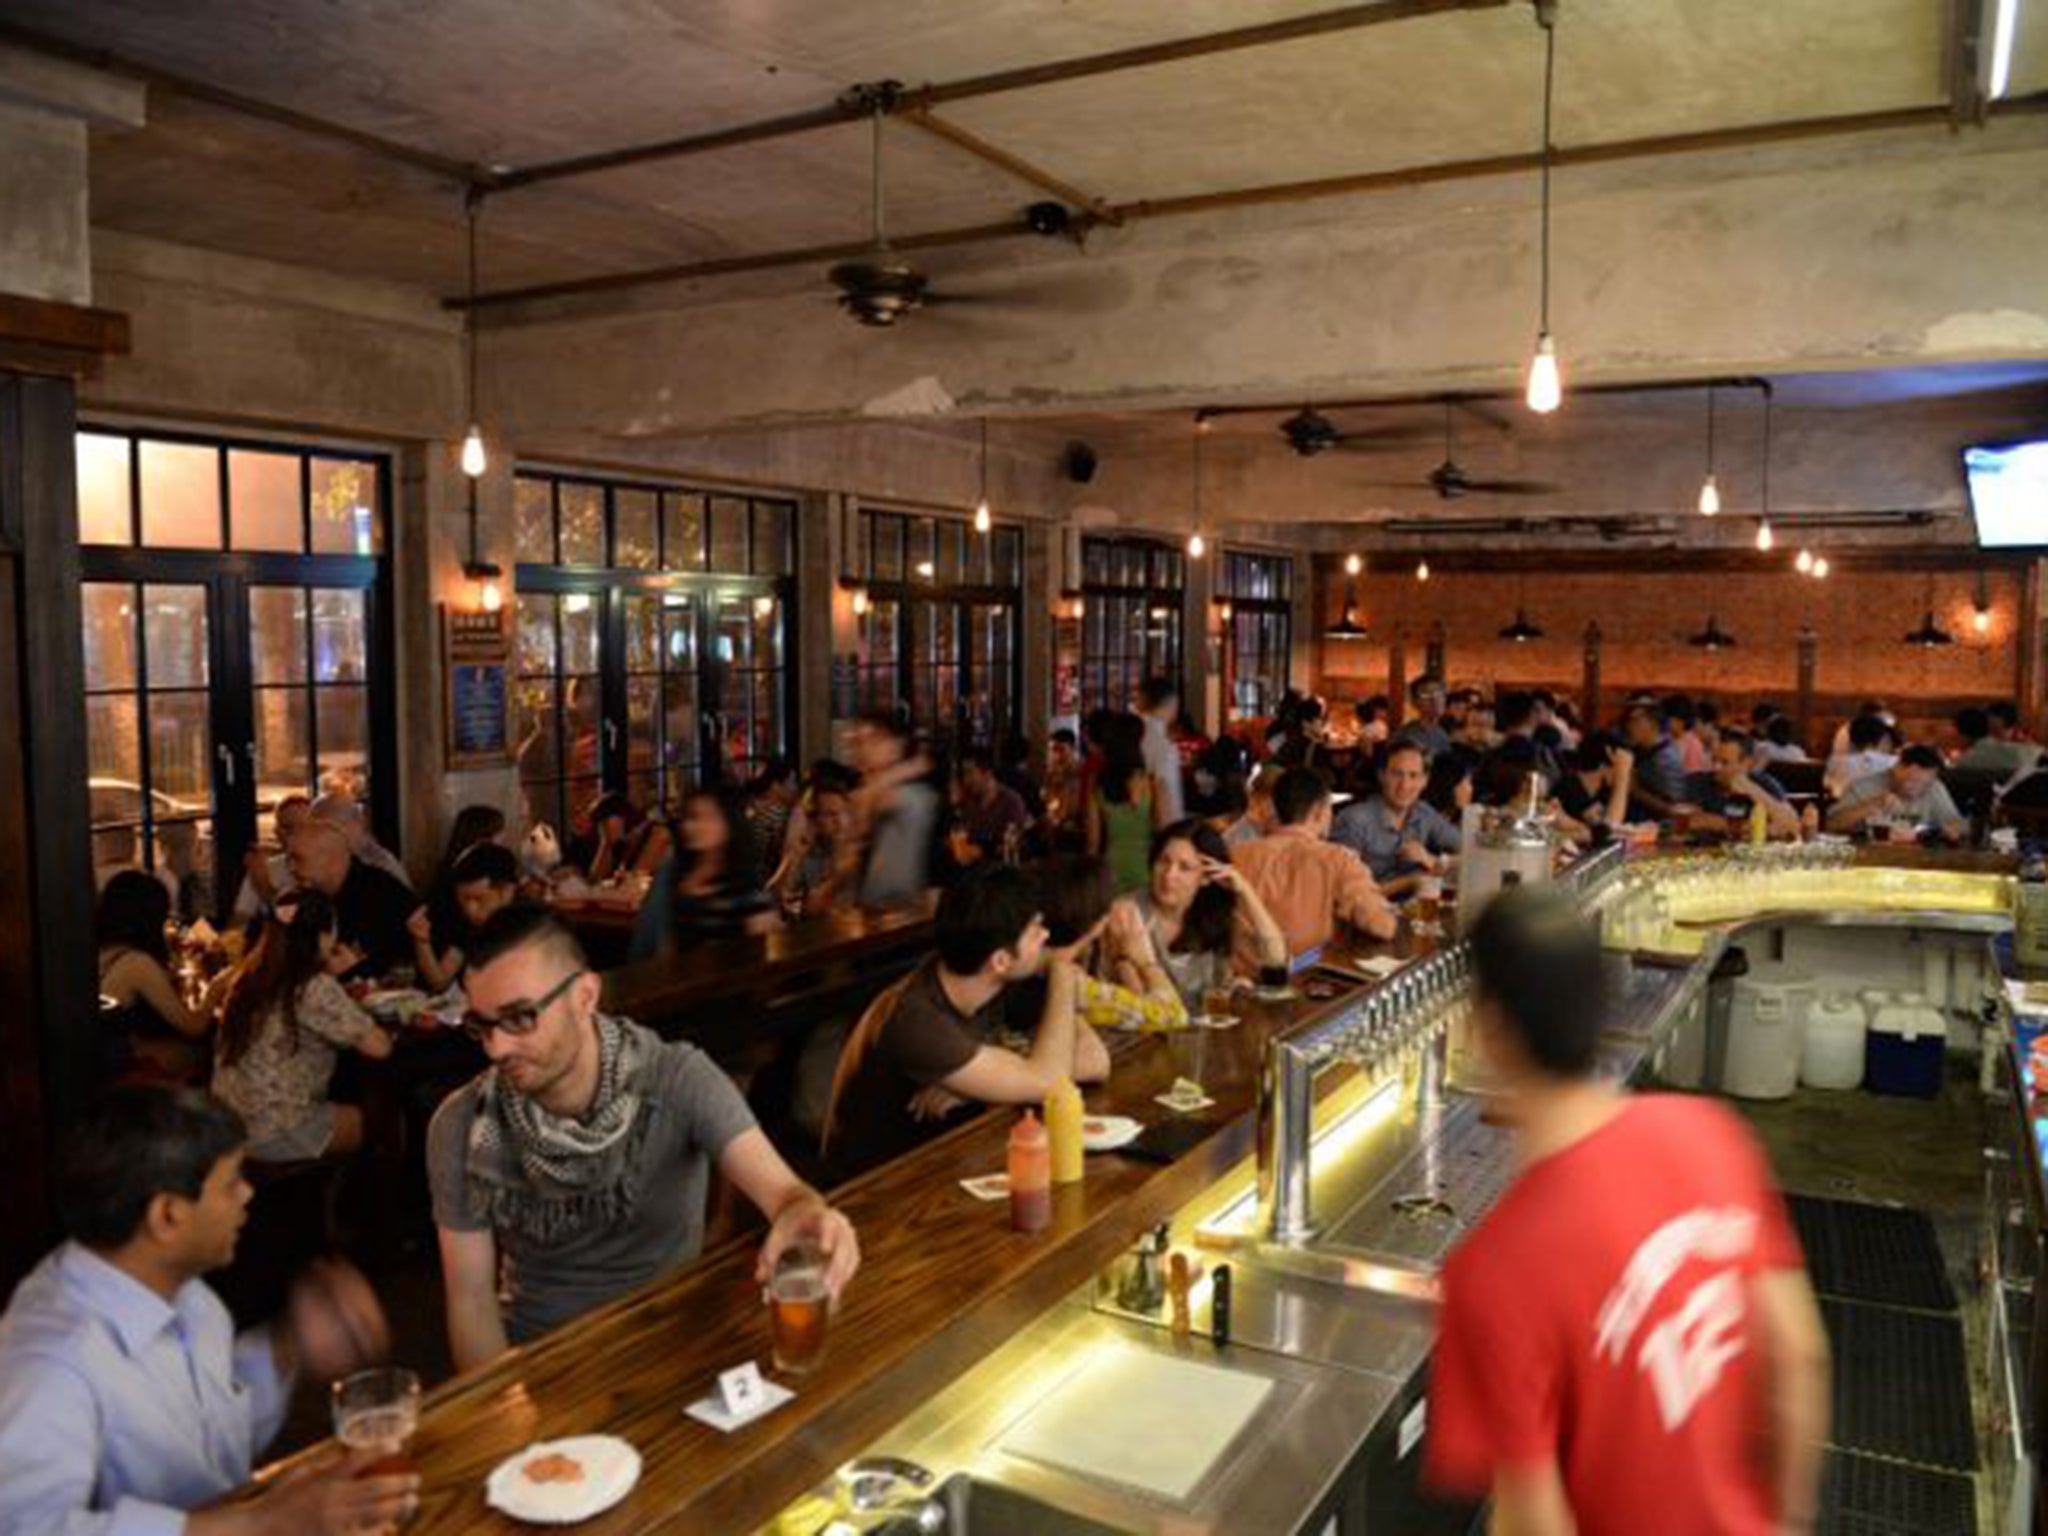 Business is brisk at Great Leap Brewing, opened in 2010 by US expat Carl Setzer